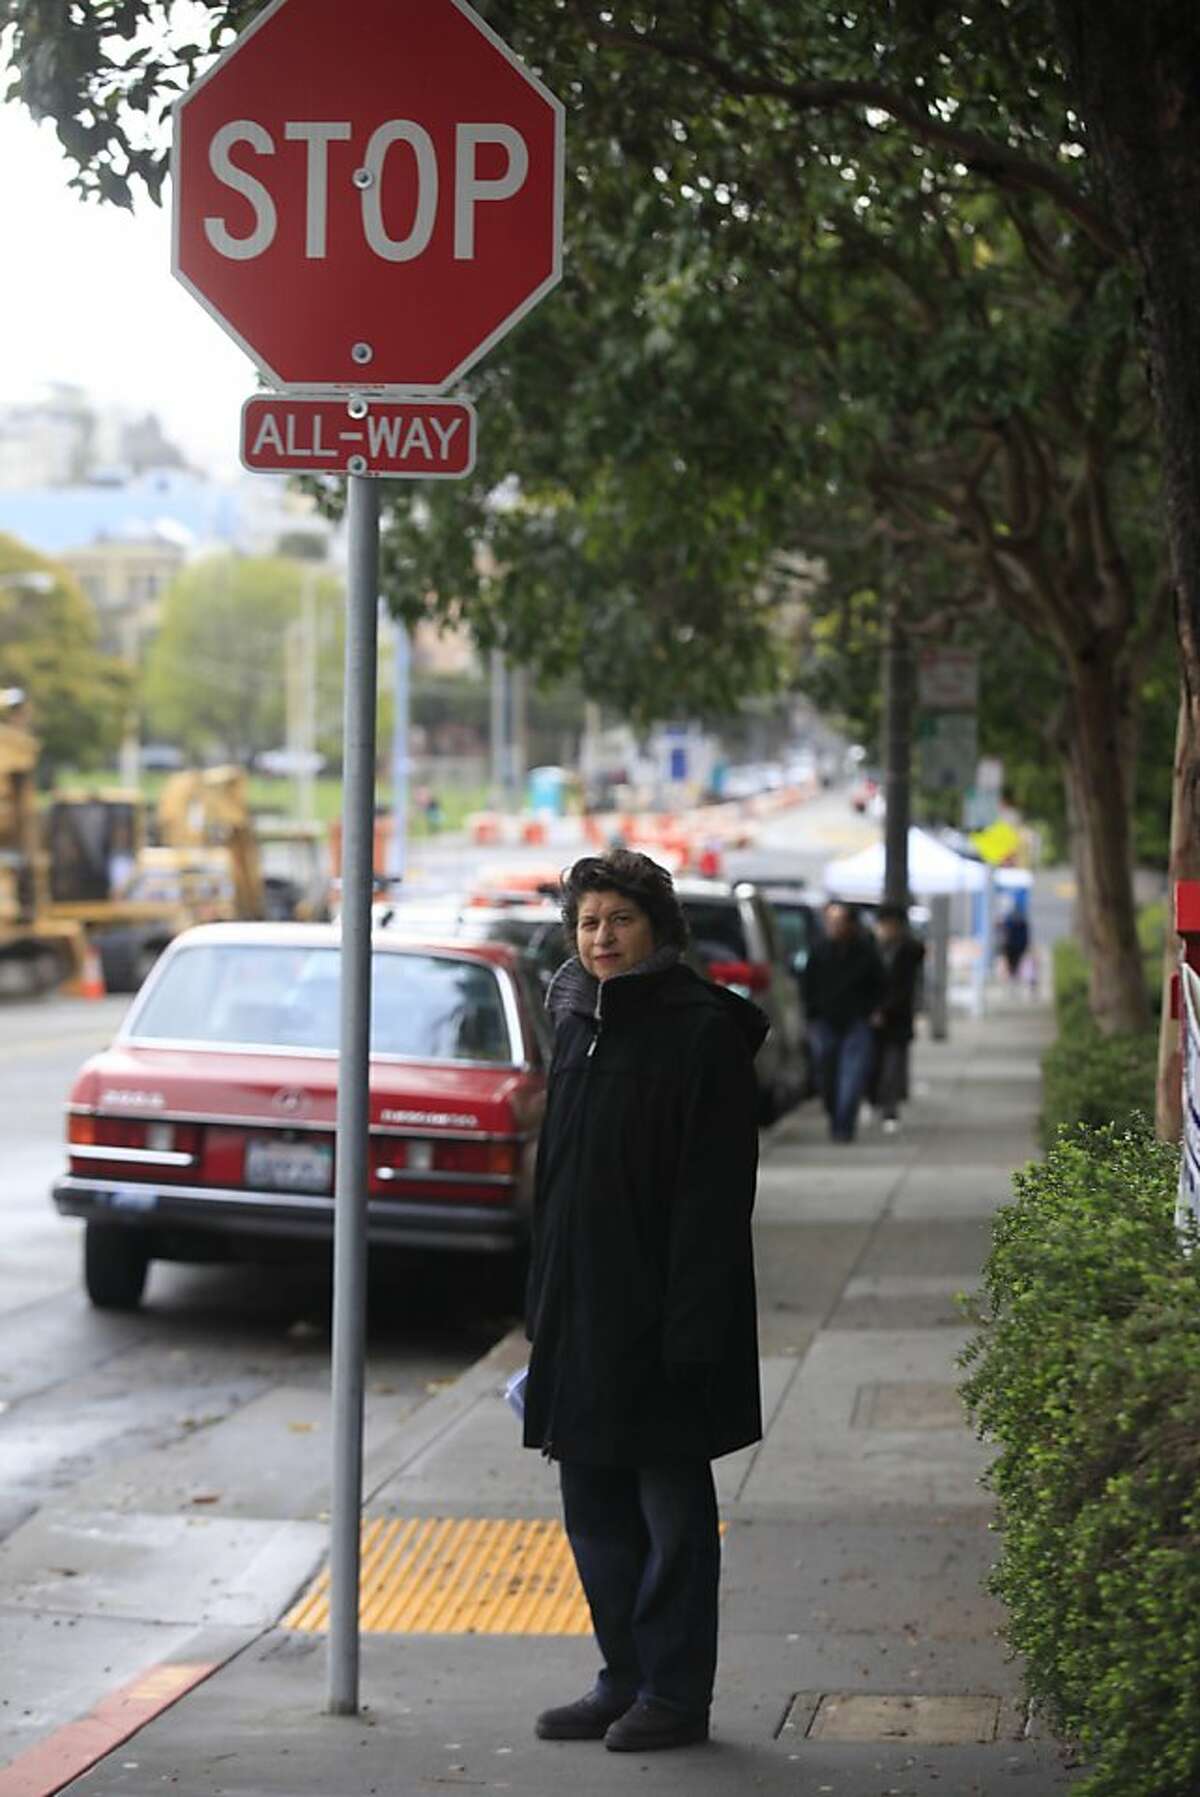 Pat Tura, chairman of Adopt a Corner program and Duboce Triangle Neighborhood Association board member, stands at the intersection at Duboce and Scott on Wednesday, March 28, 2012 in San Francisco, Calif. The groups first project was the STOP sign on Duboce Street at Scott which was hard to see due to the position of the sign and the trees surrounding it.